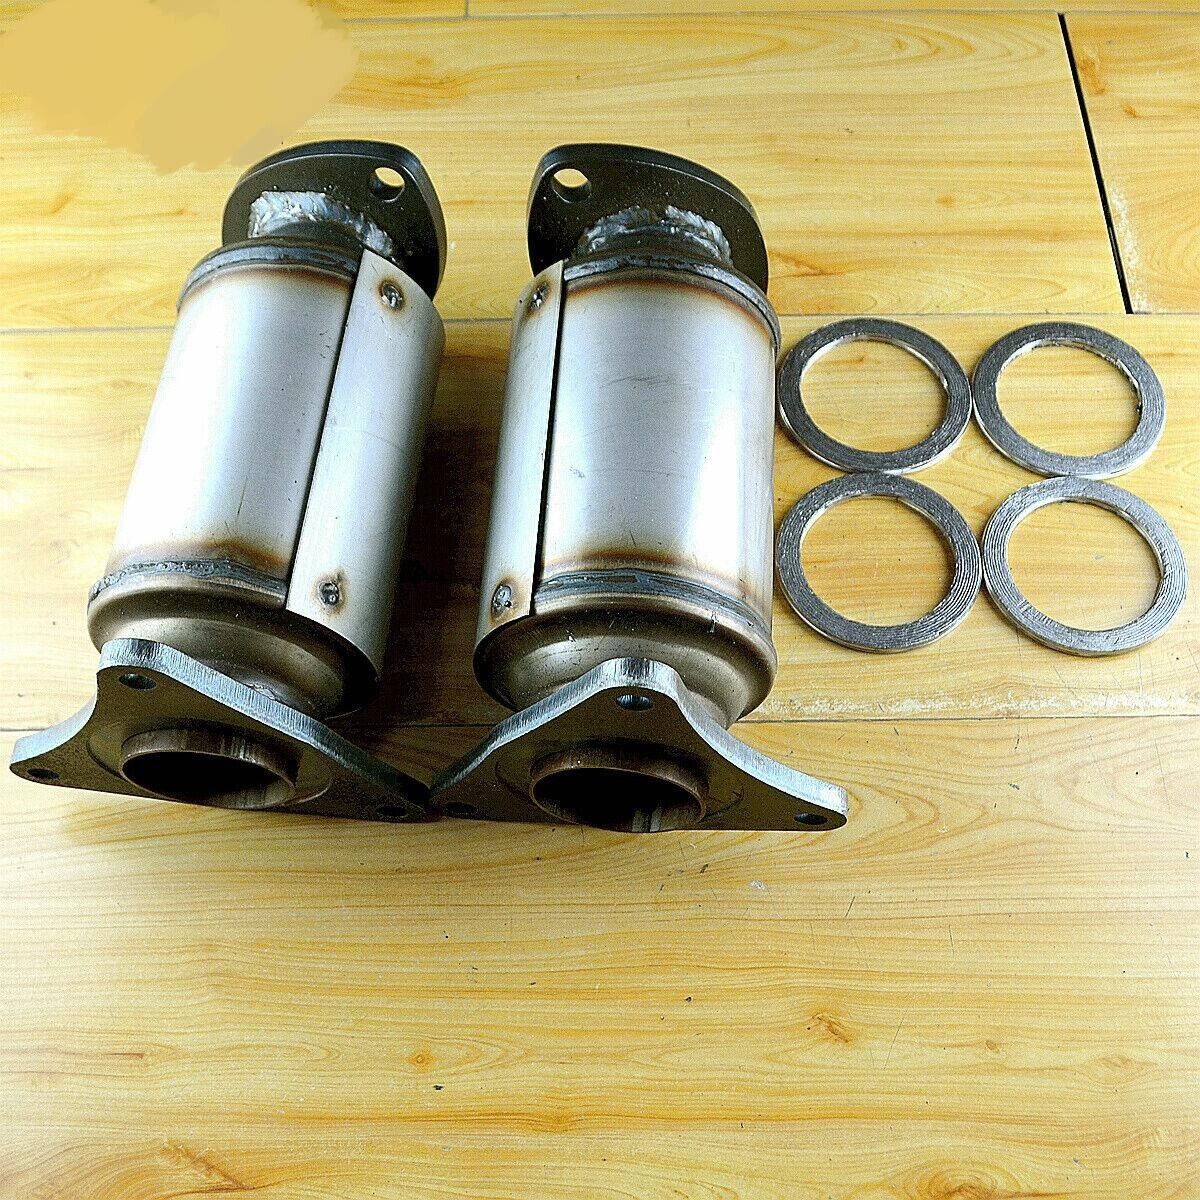 NEW for Lexus LS430 GS430 4.3L Both Front Catalytic Converters 2001-2007 US FAST